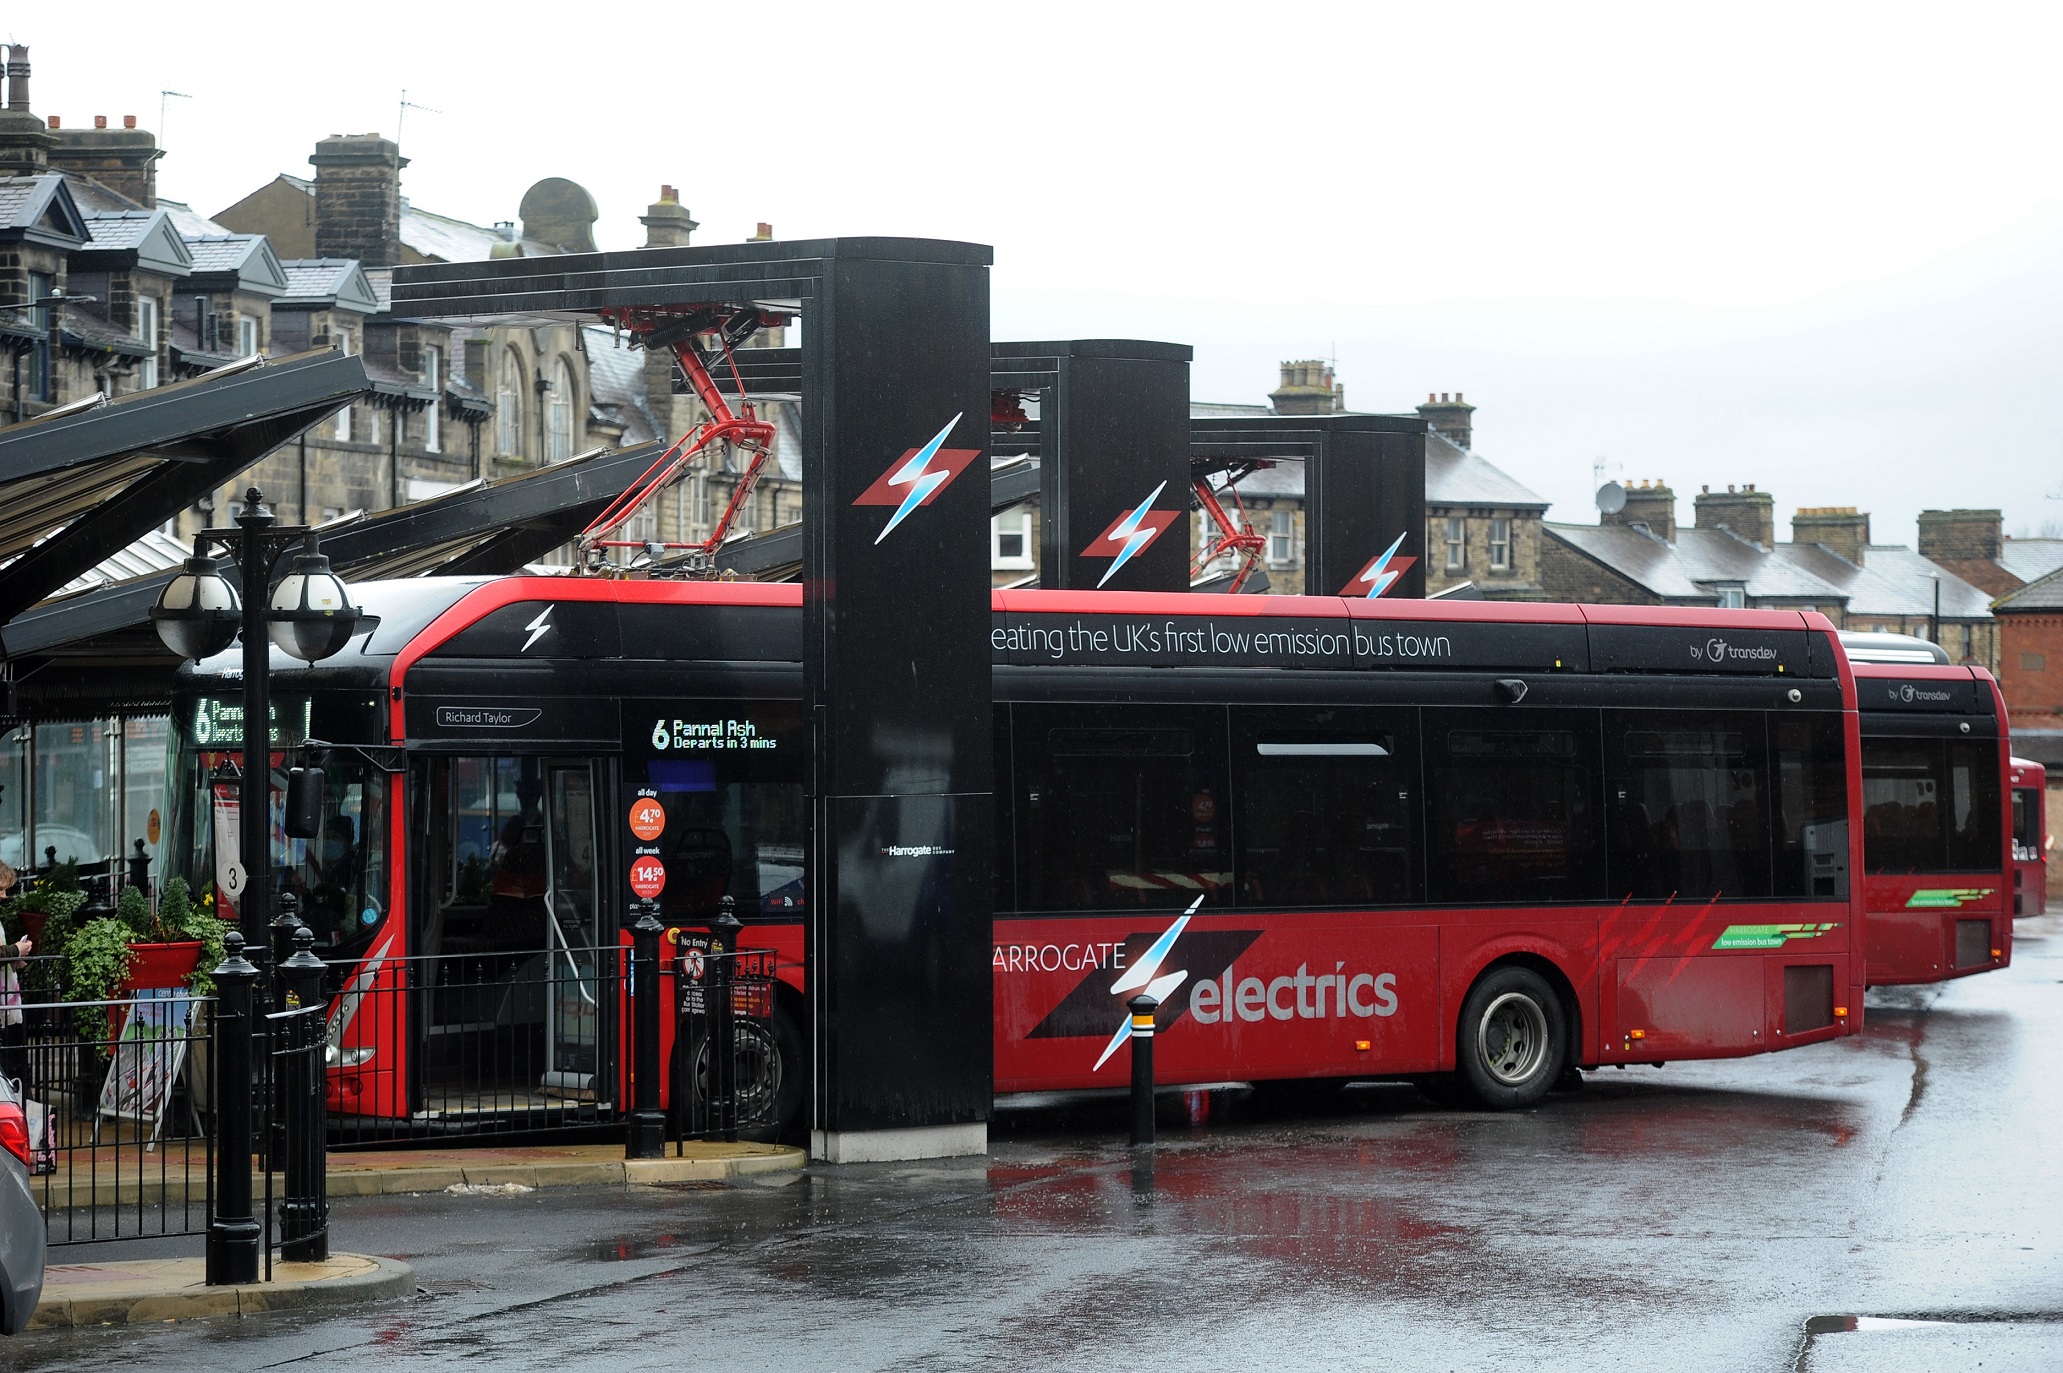 Transdev Blazefield to operate free Harrogate Electrics services on Sundays in January and February